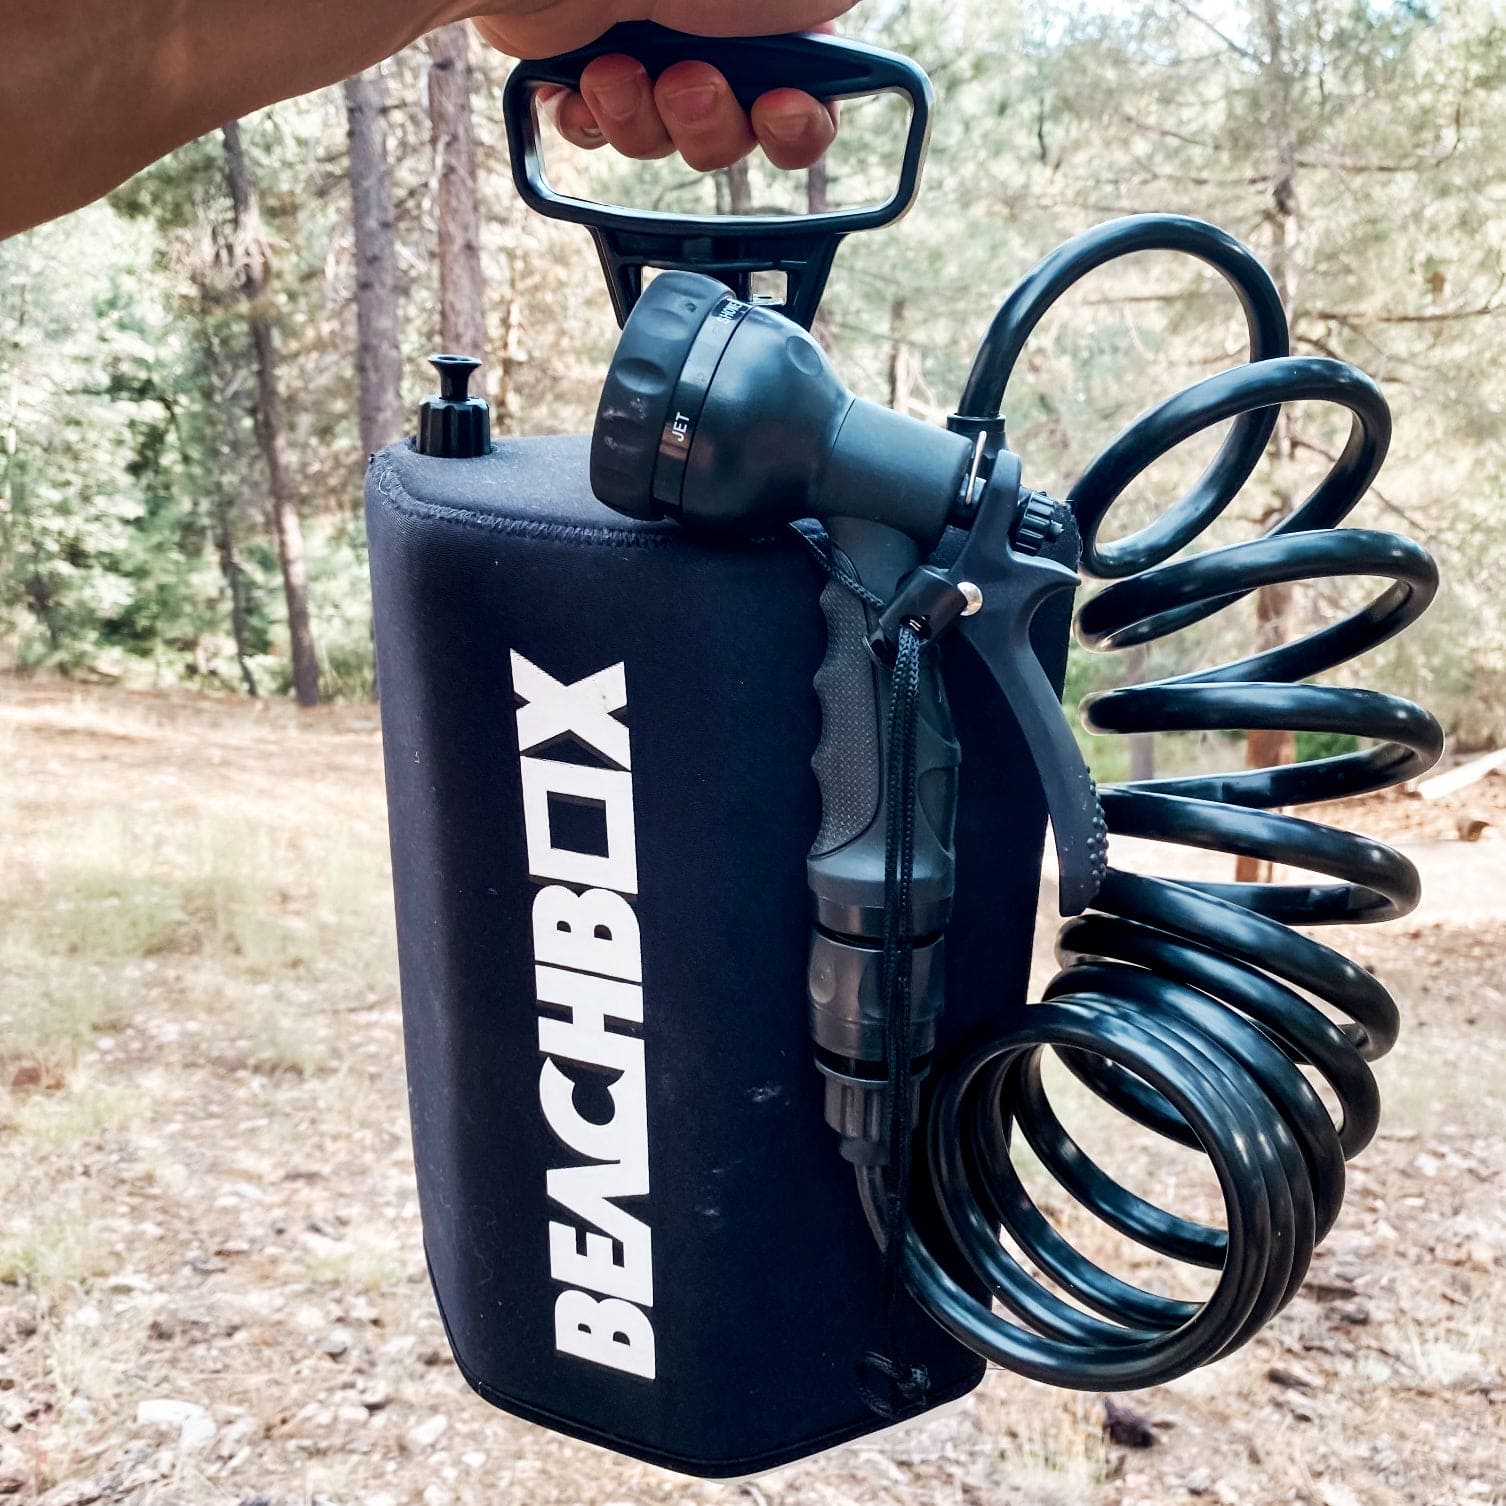 Buy a Portable Shower for the Beach and Camping from BeachBox